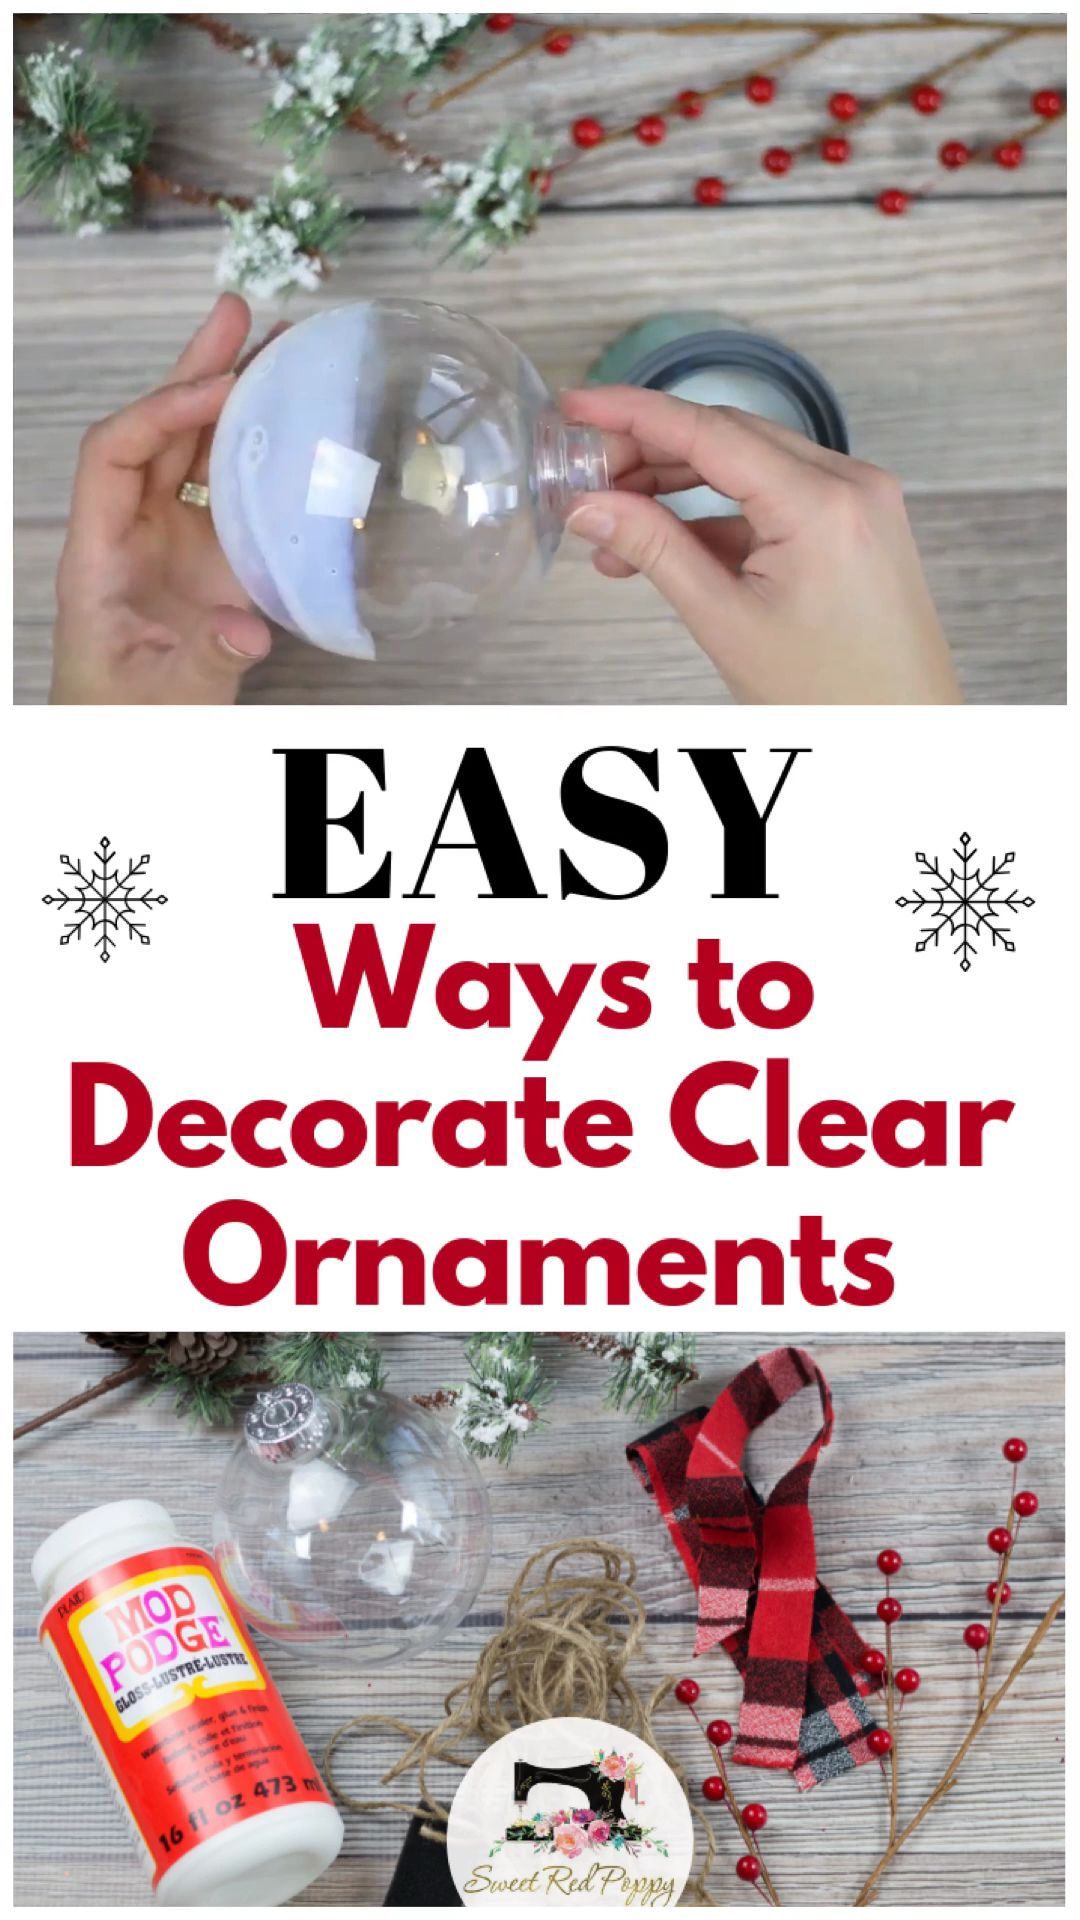 Easy Ways to Decorate Clear Plastic Ornaments for Christmas - Sweet Red Poppy - Easy Ways to Decorate Clear Plastic Ornaments for Christmas - Sweet Red Poppy -   diy Easy christmas